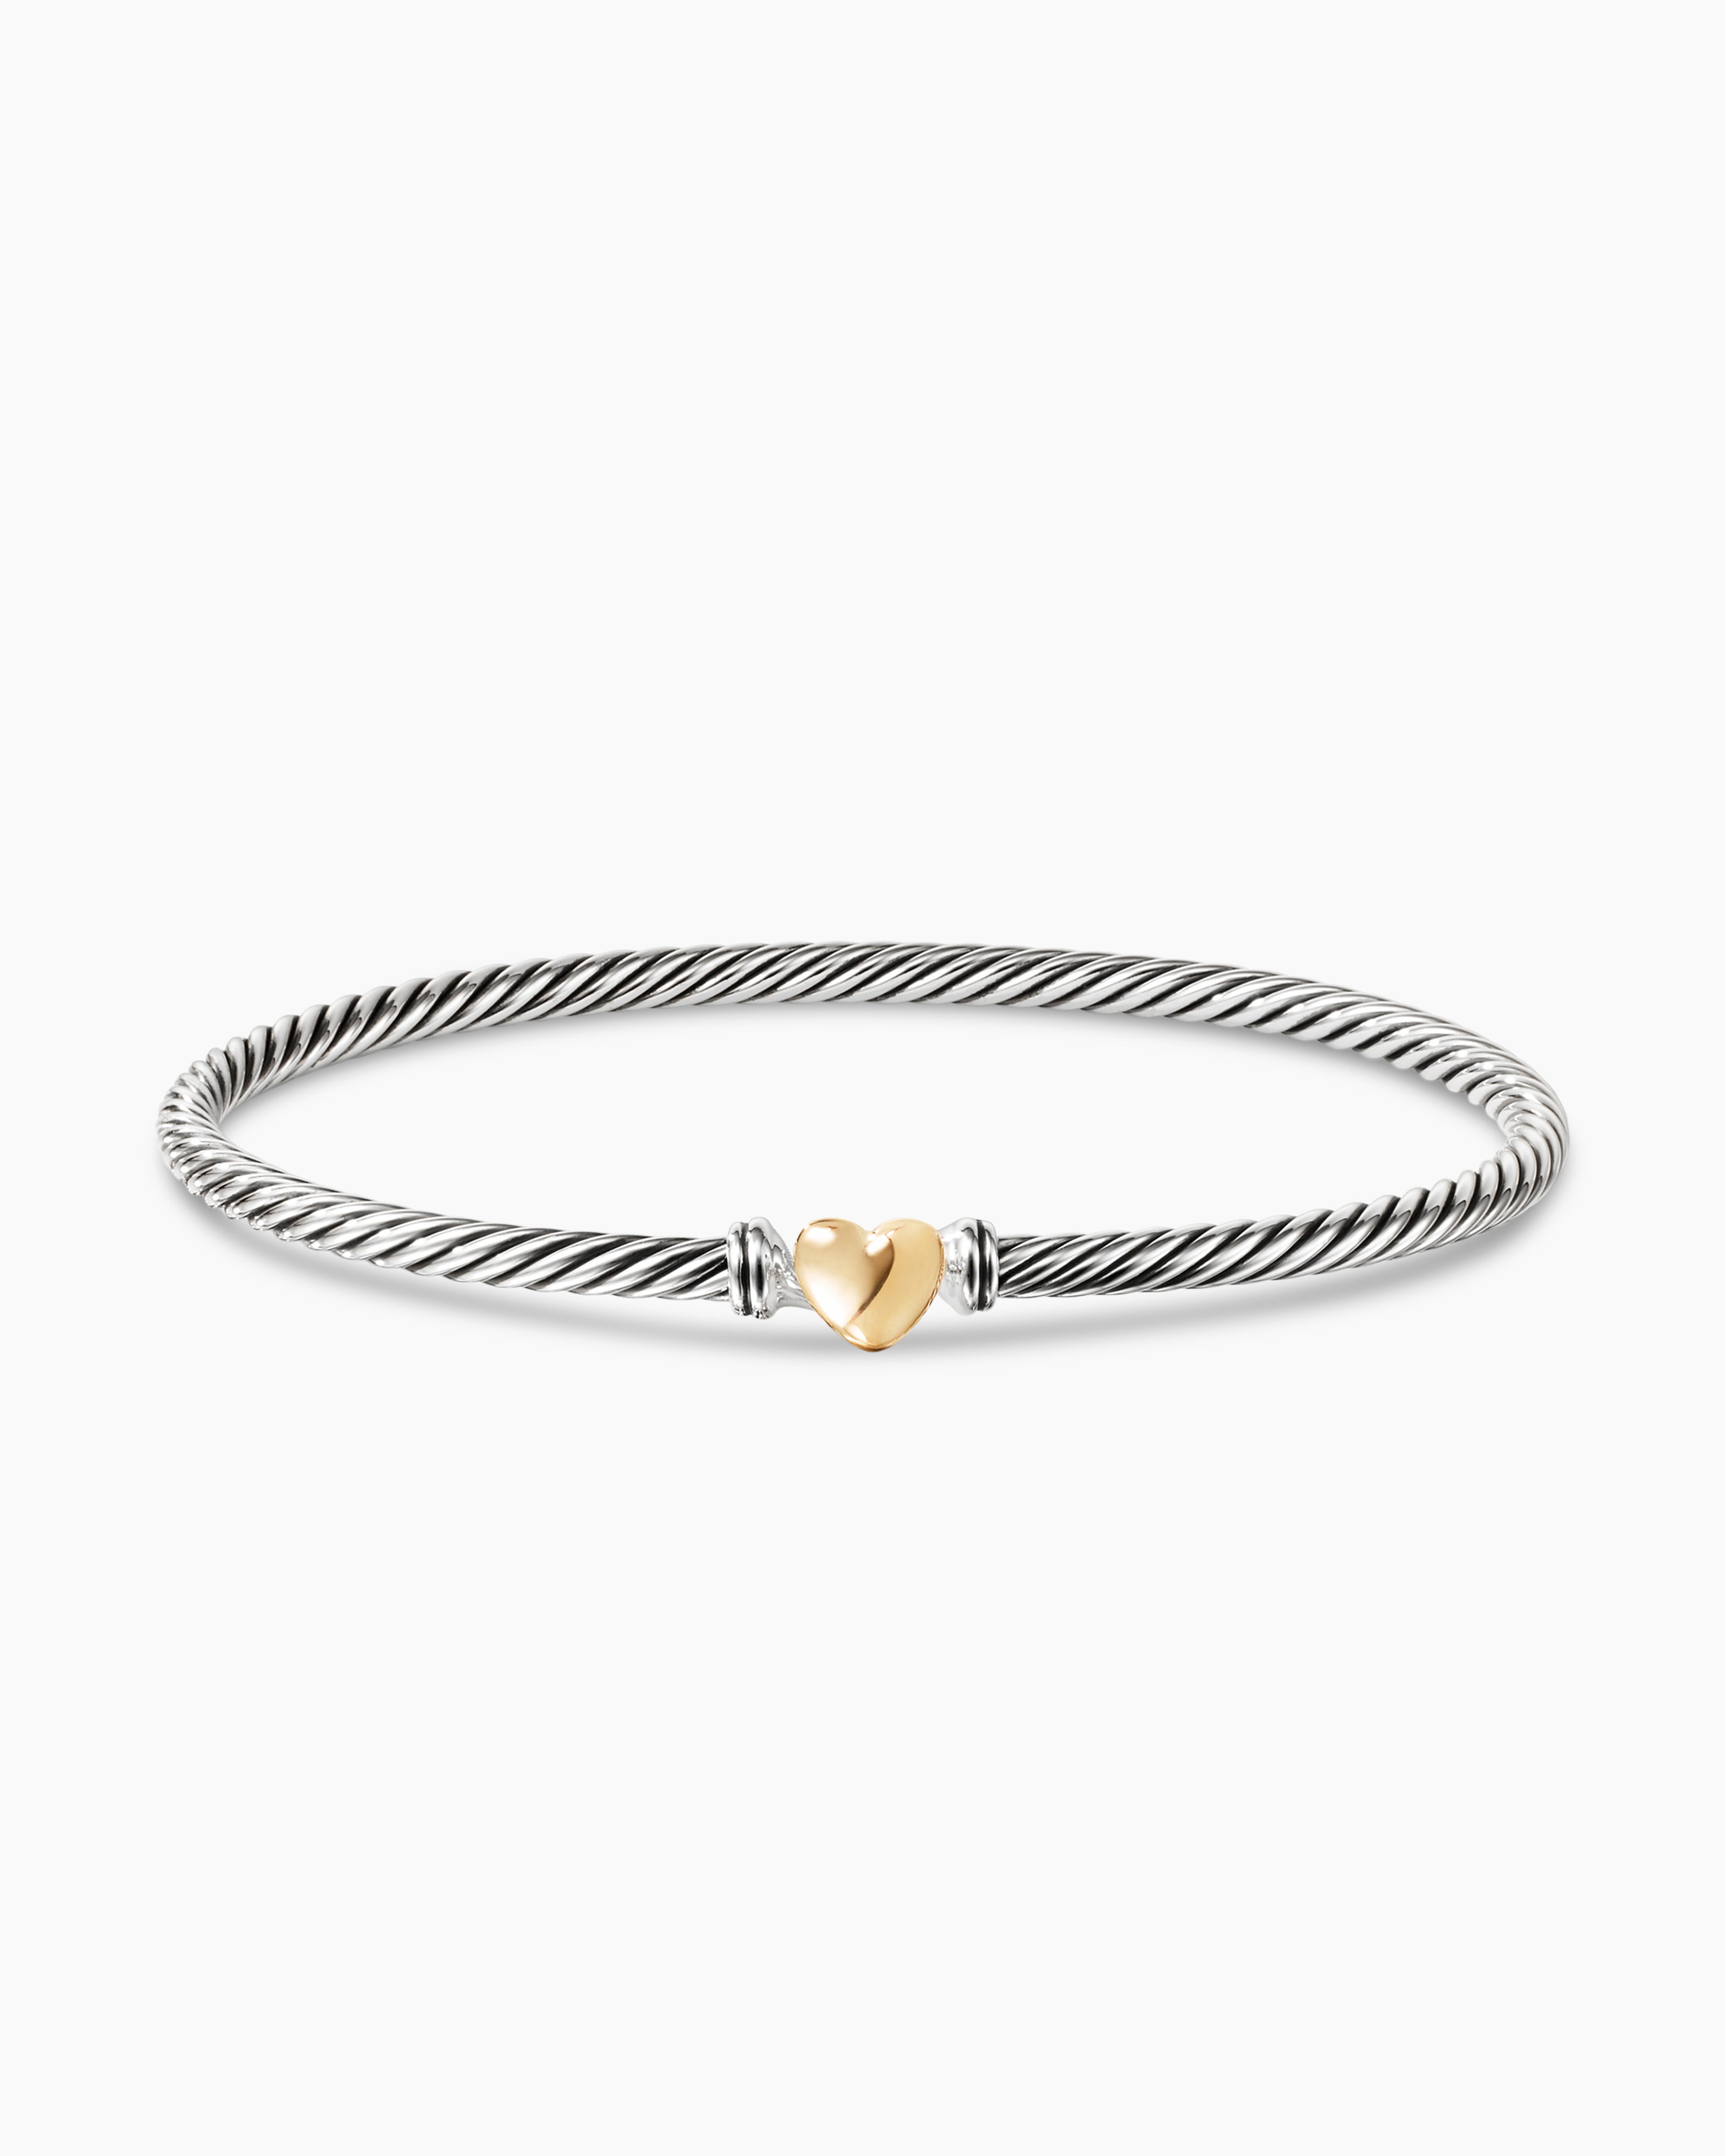 DY Madison Chain Bracelet in Sterling Silver with 18K Yellow Gold, 11mm | David  Yurman